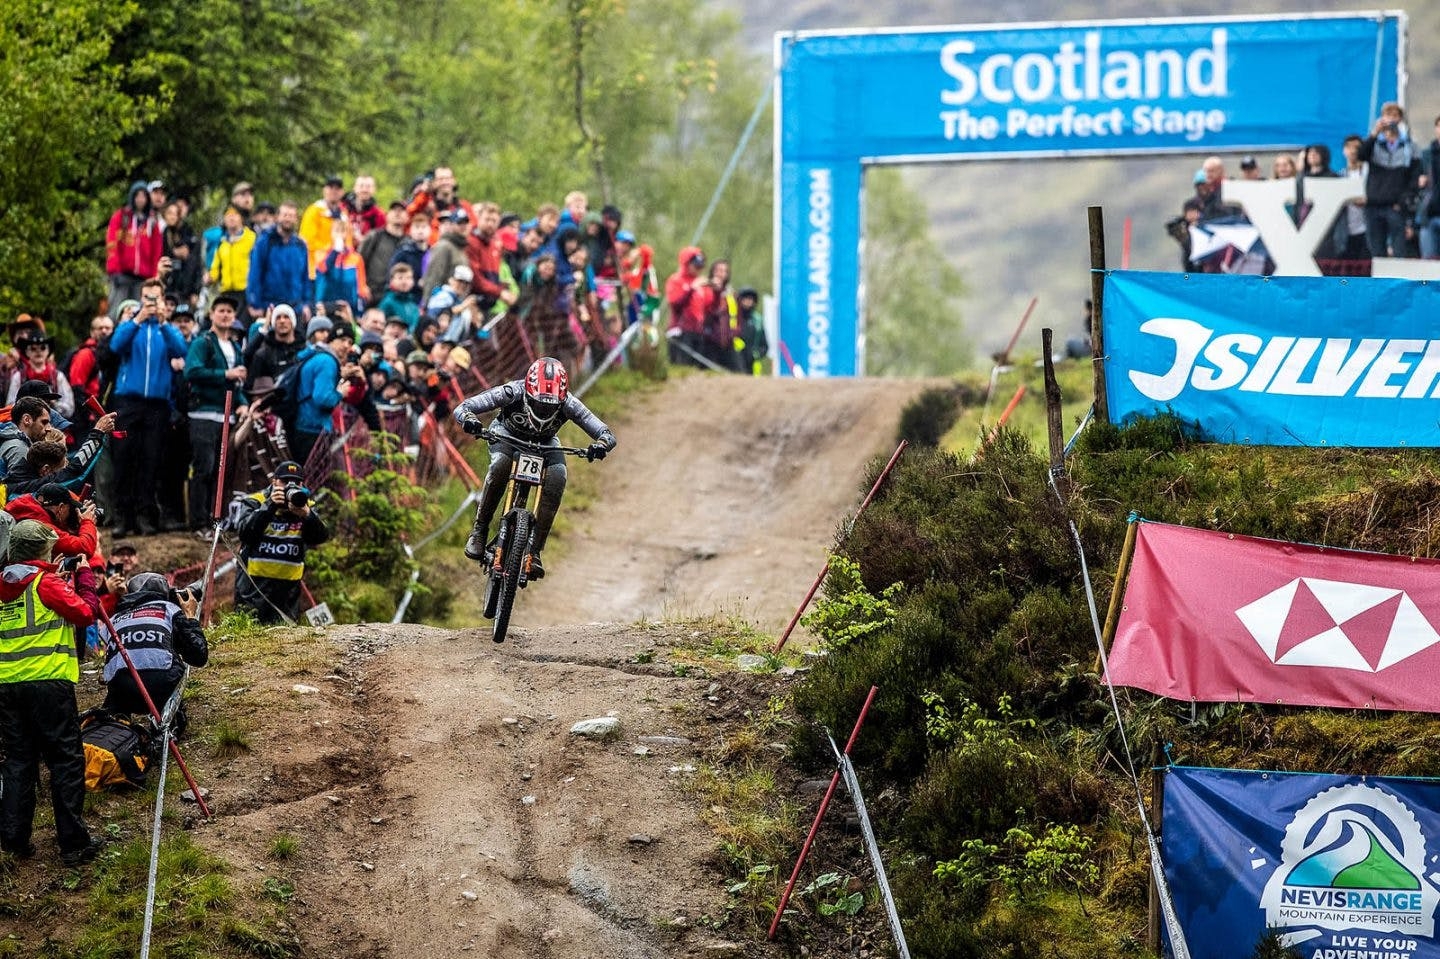 Fort William World Cup - Riding on a doubletrack section of trail